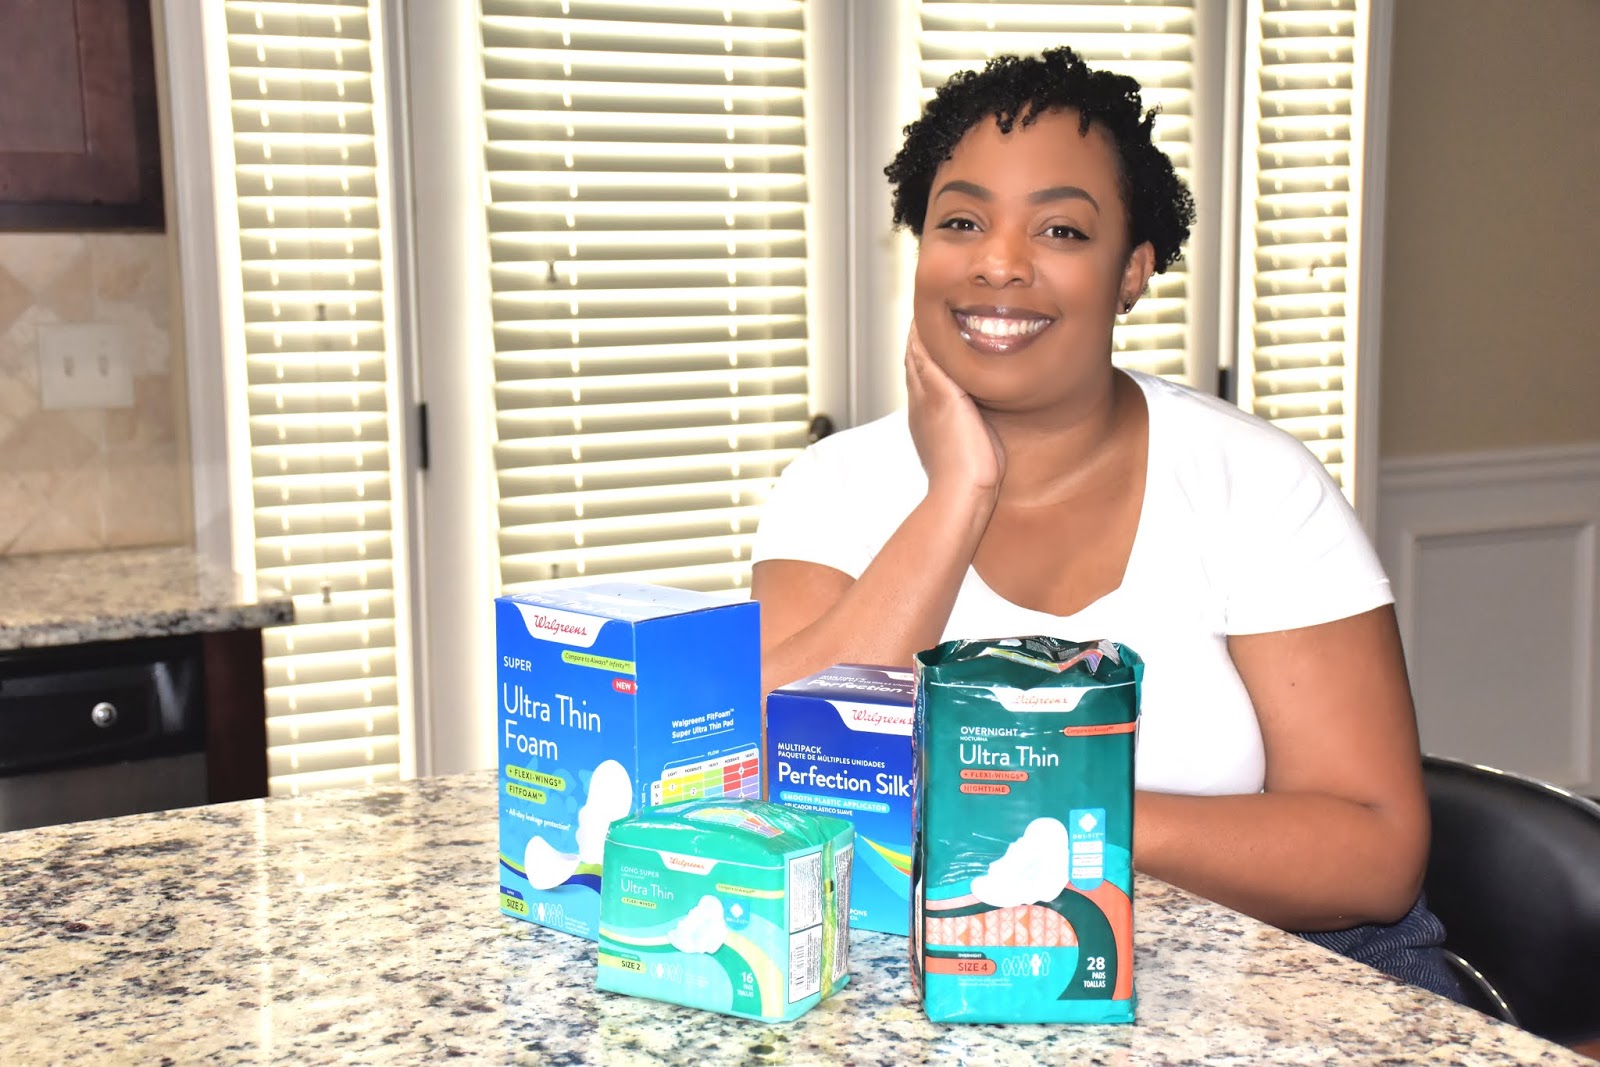 Are Store Brand Feminine Products Worth it?  Walgreens Feminine Care Review